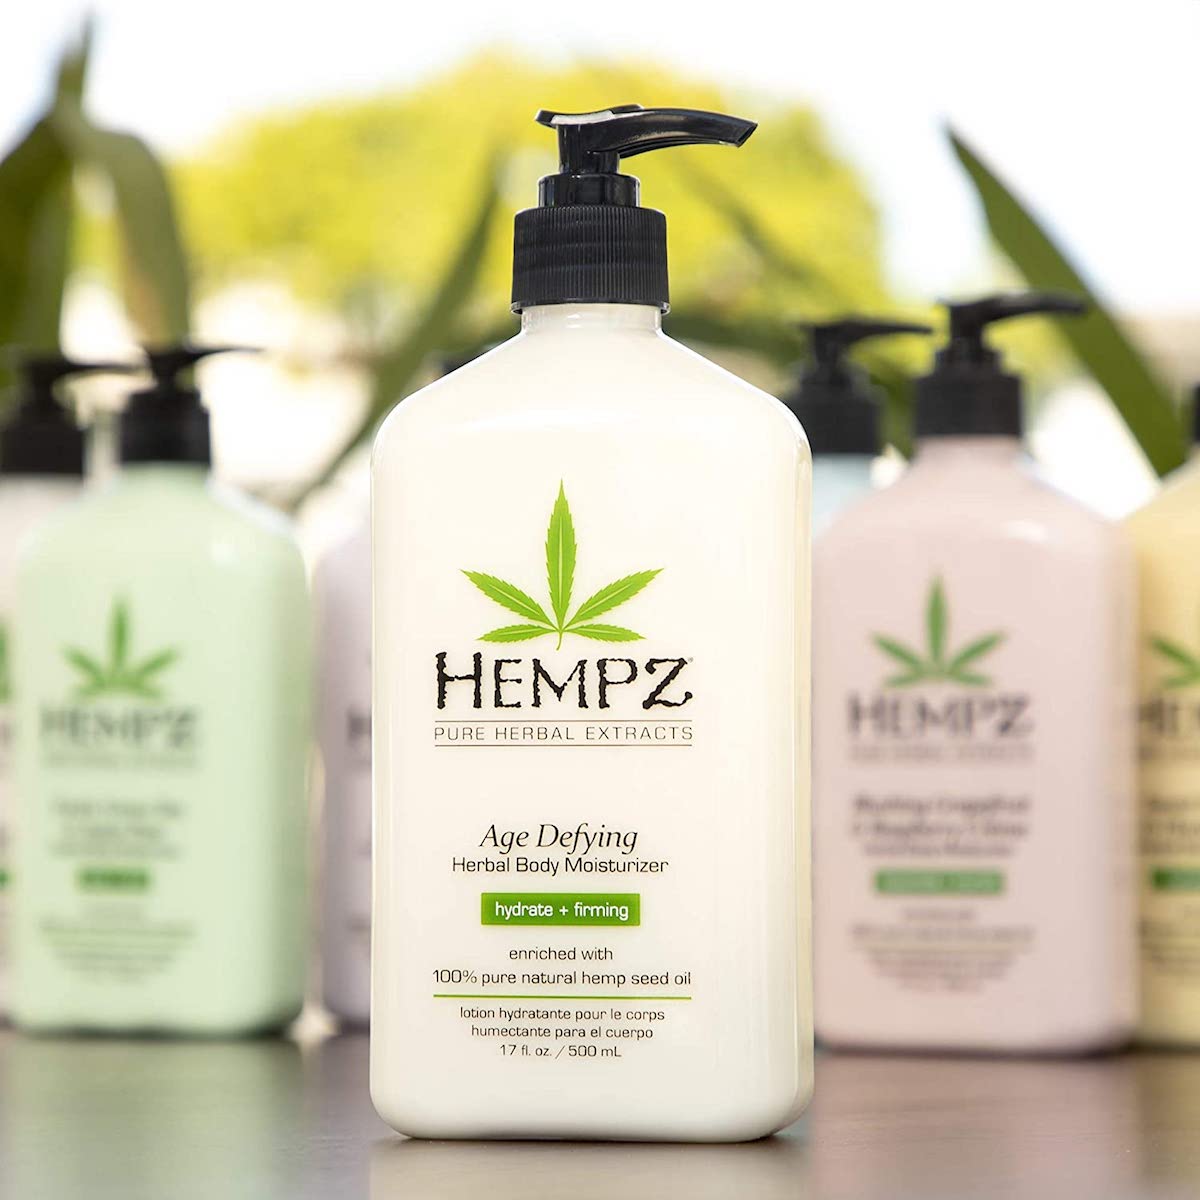 hempz body lotion pump bottles in front of blurred out foliage